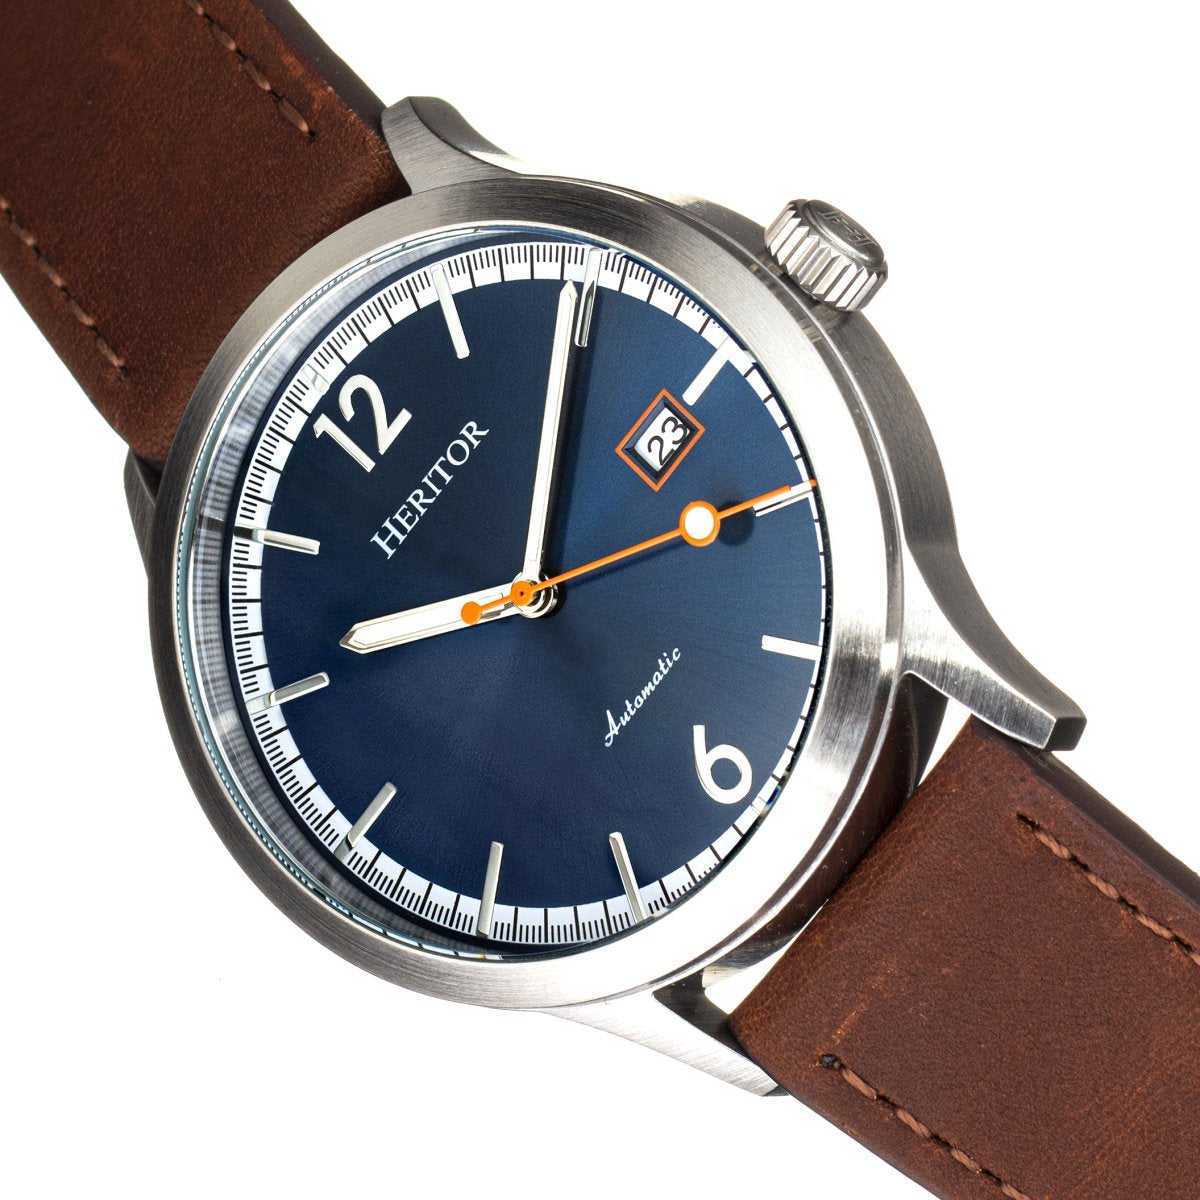 Heritor Automatic Becker Leather-Band Watch w/Date - Silver/Navy - HERHR9605